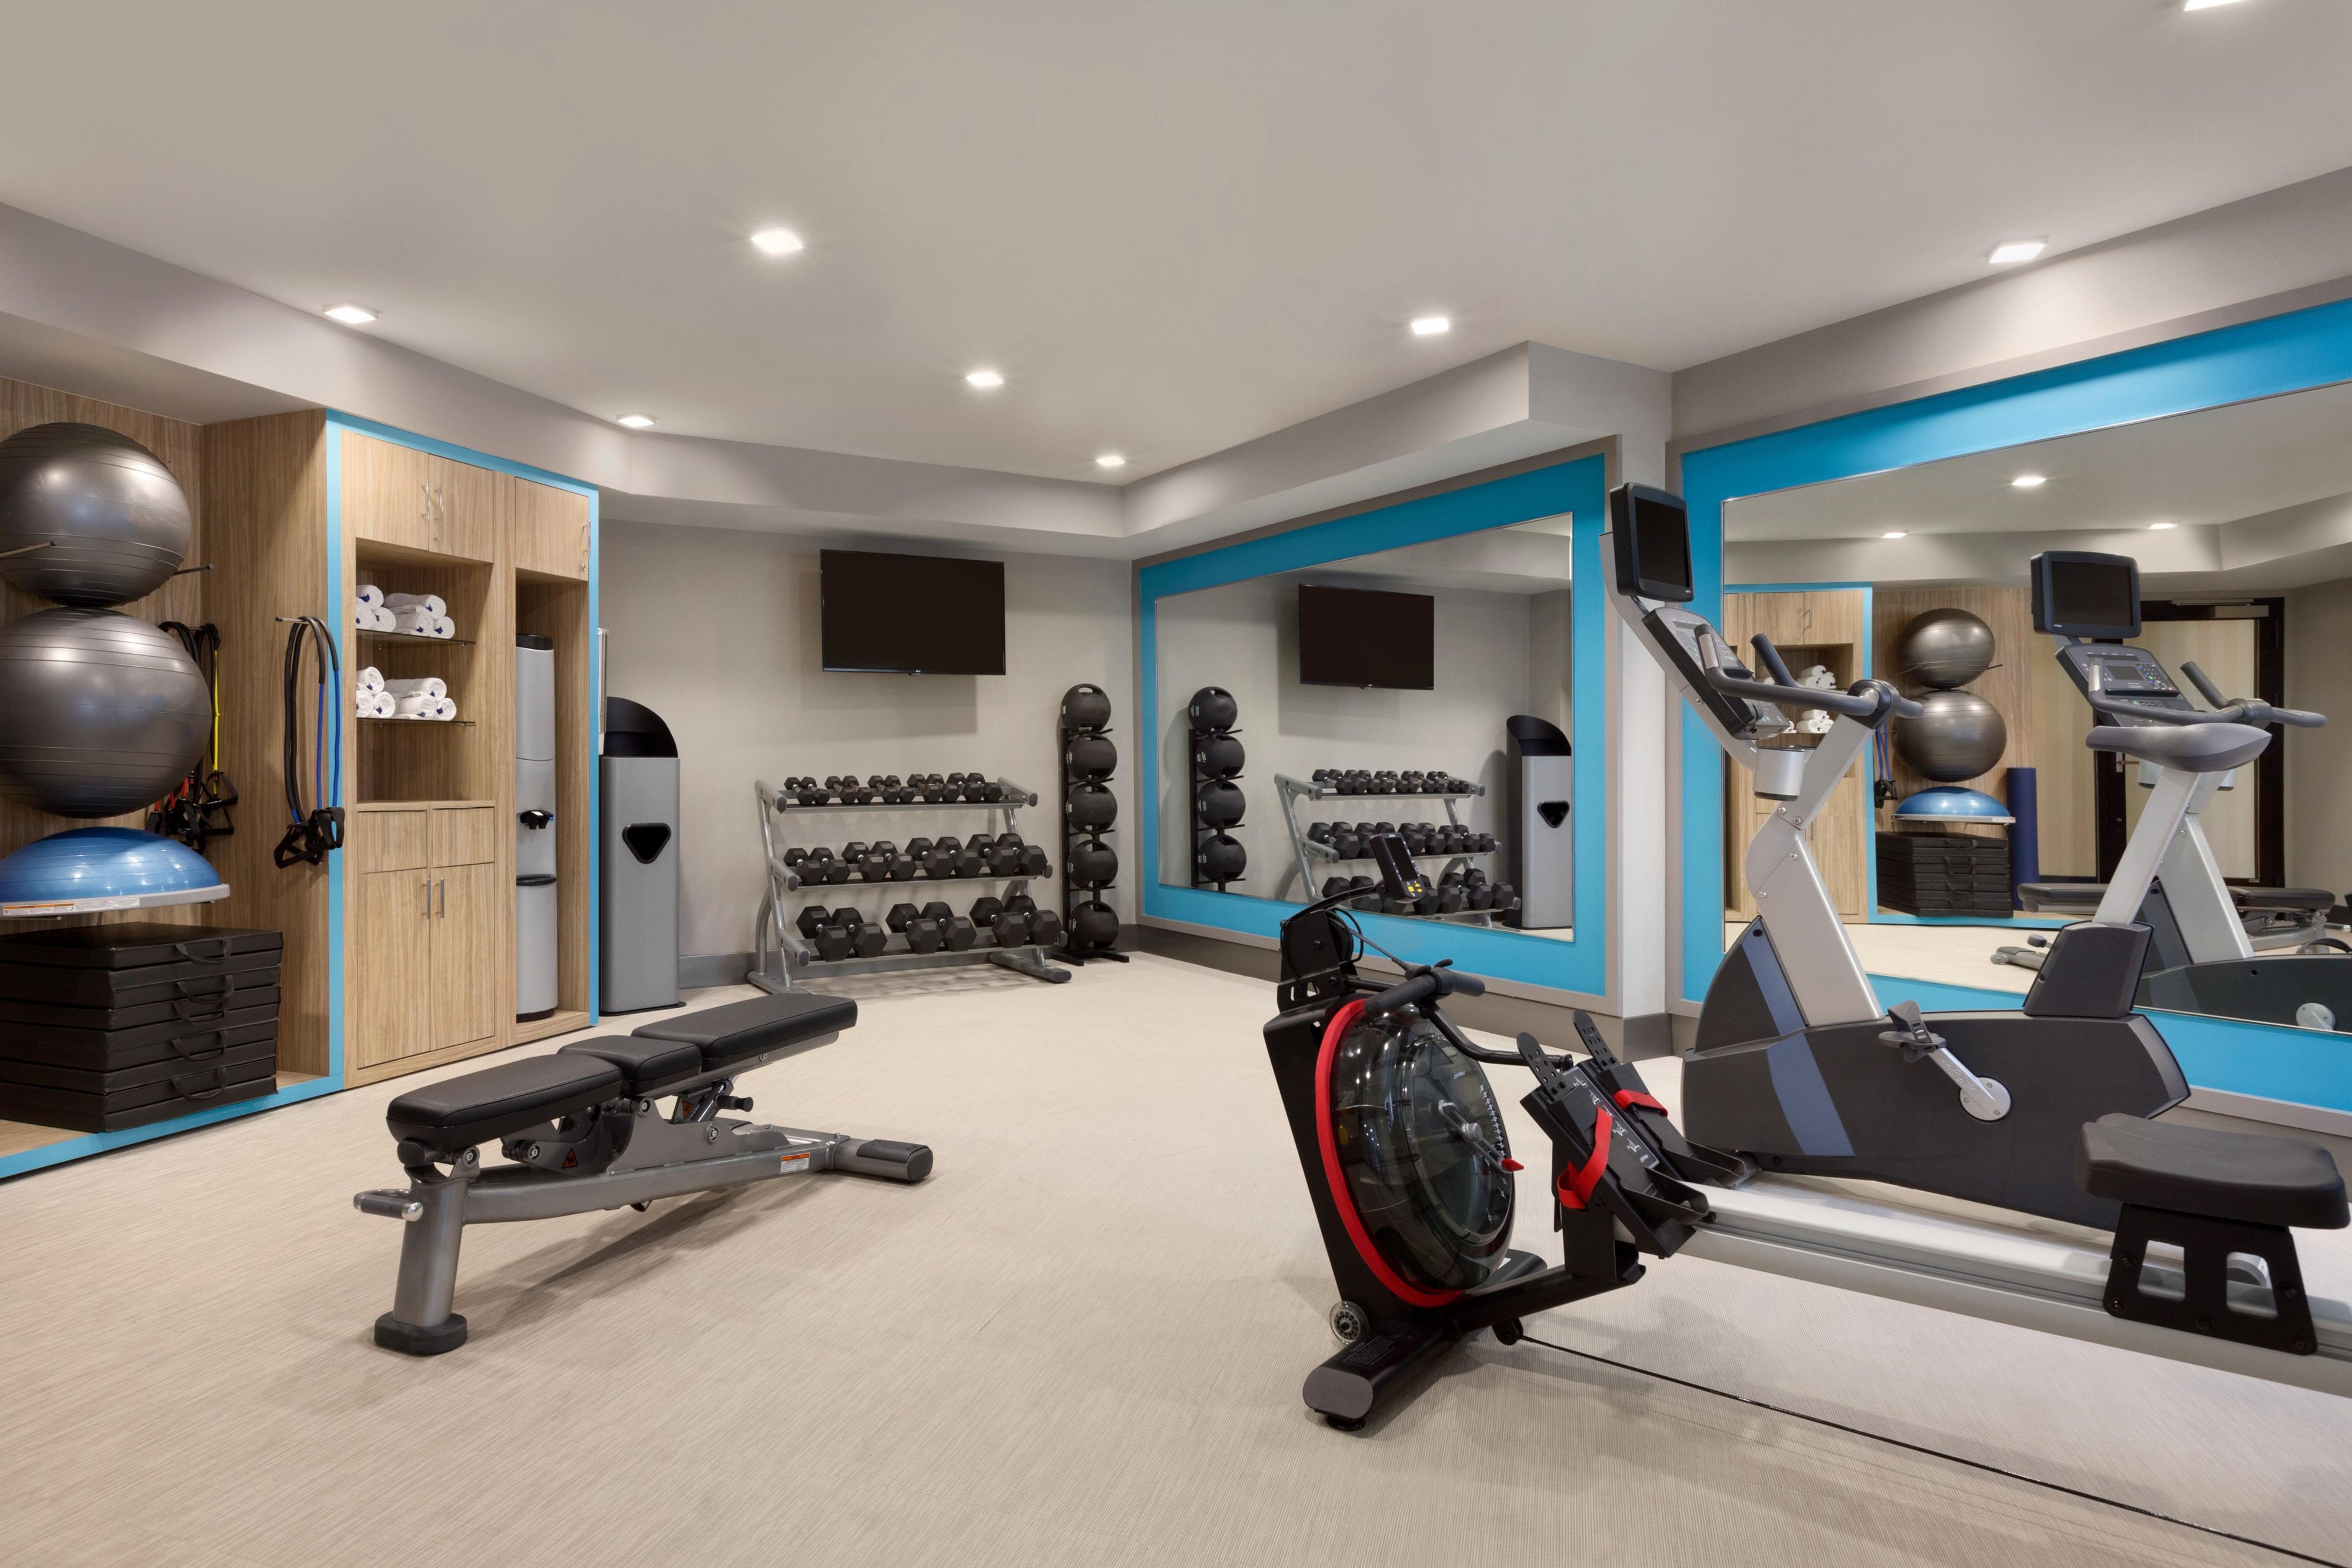 Keep your workout on track with our 24 hour fitness center.